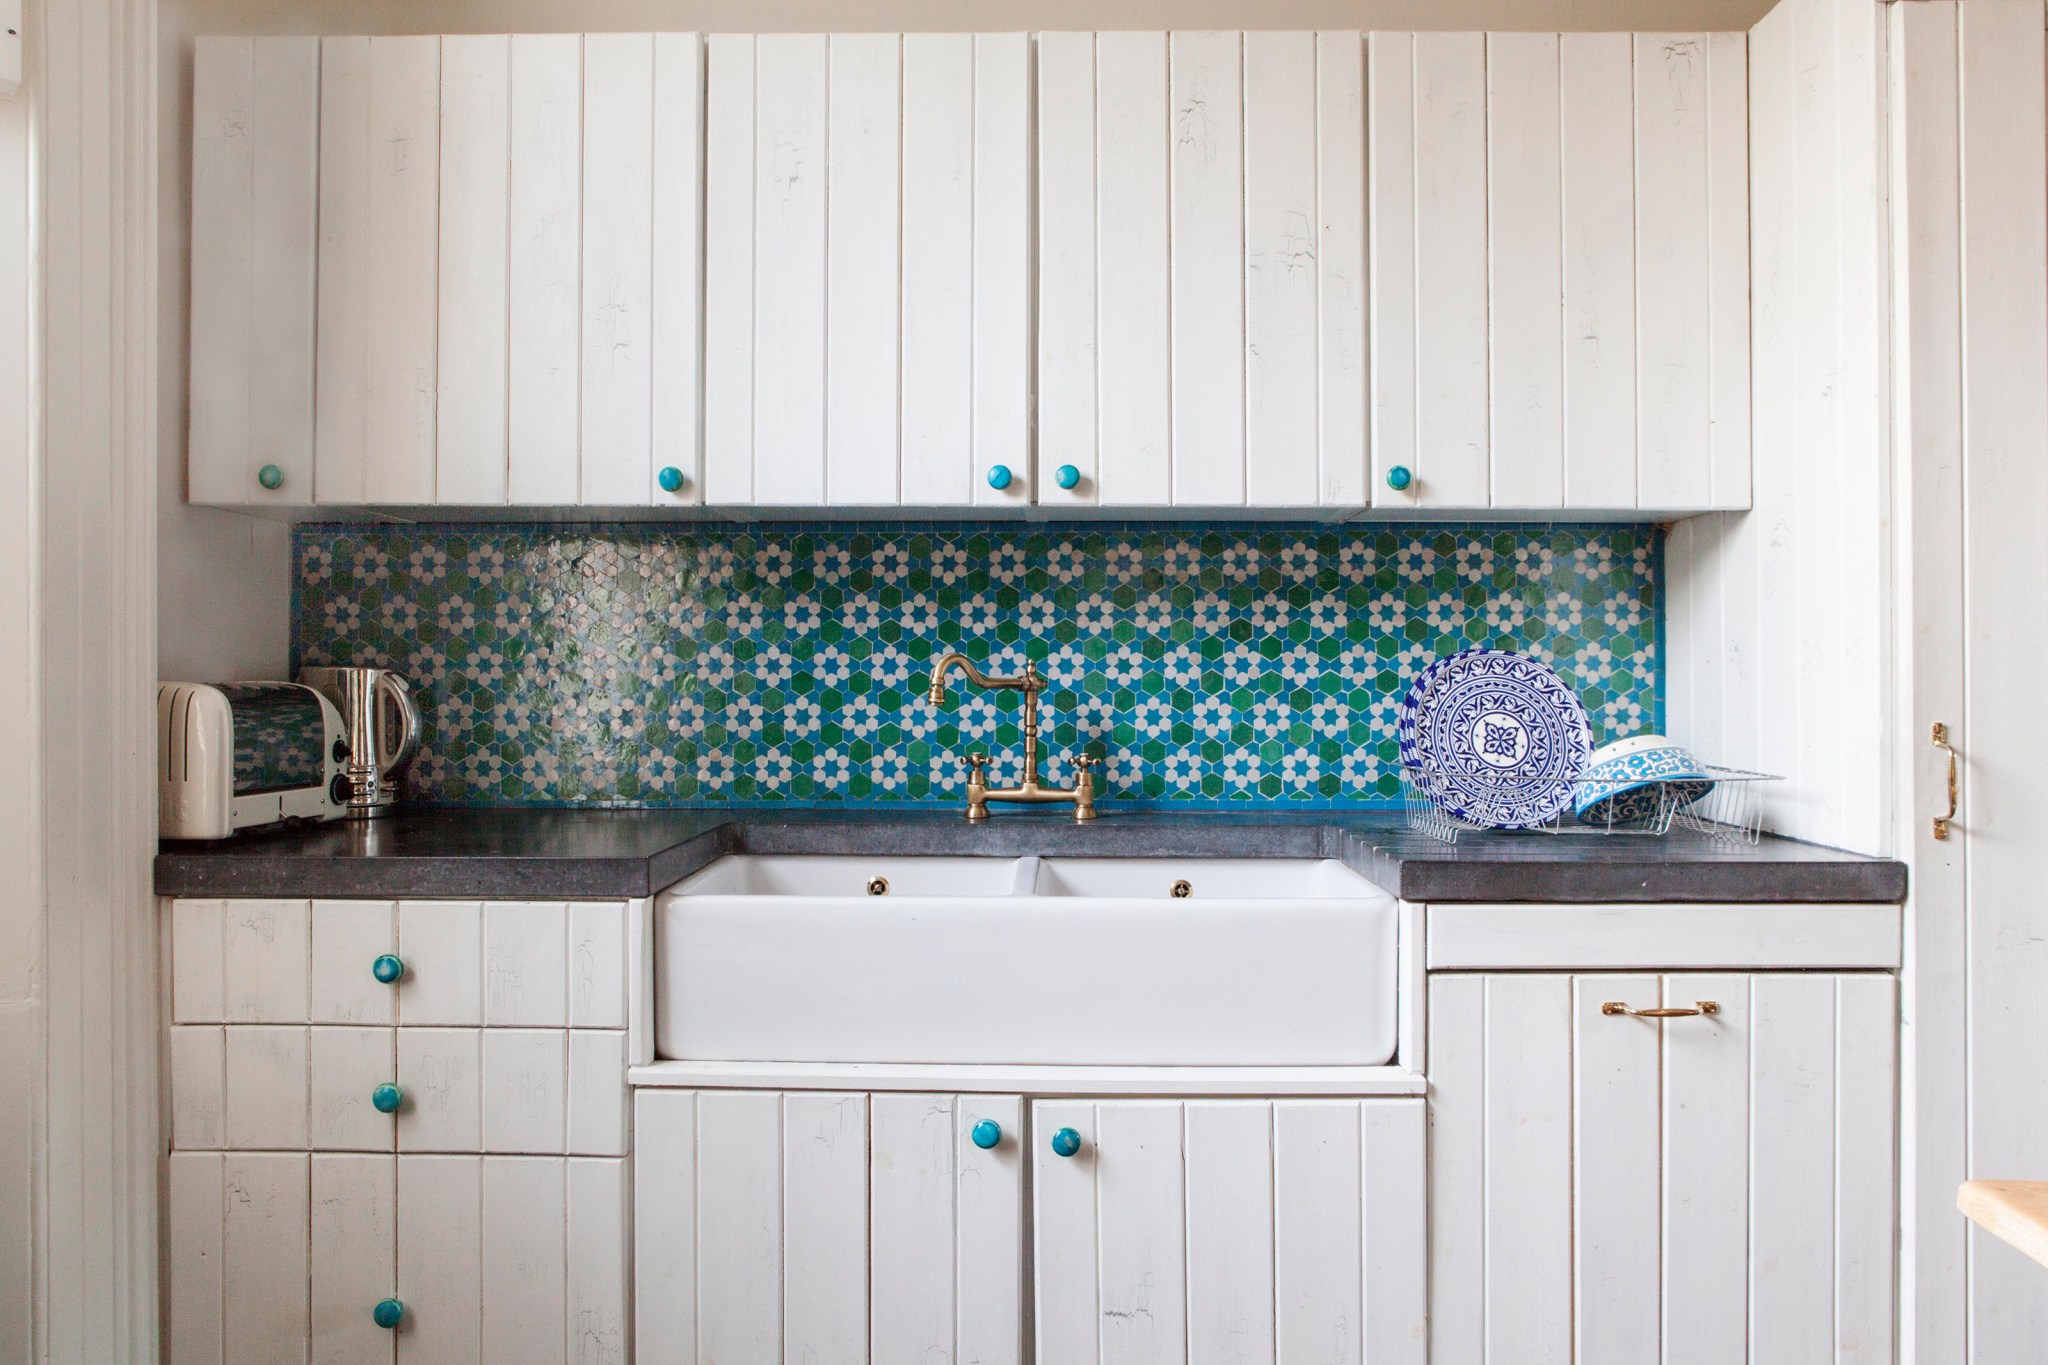 Teal knobs on white cabinets in an eclectic kitchen